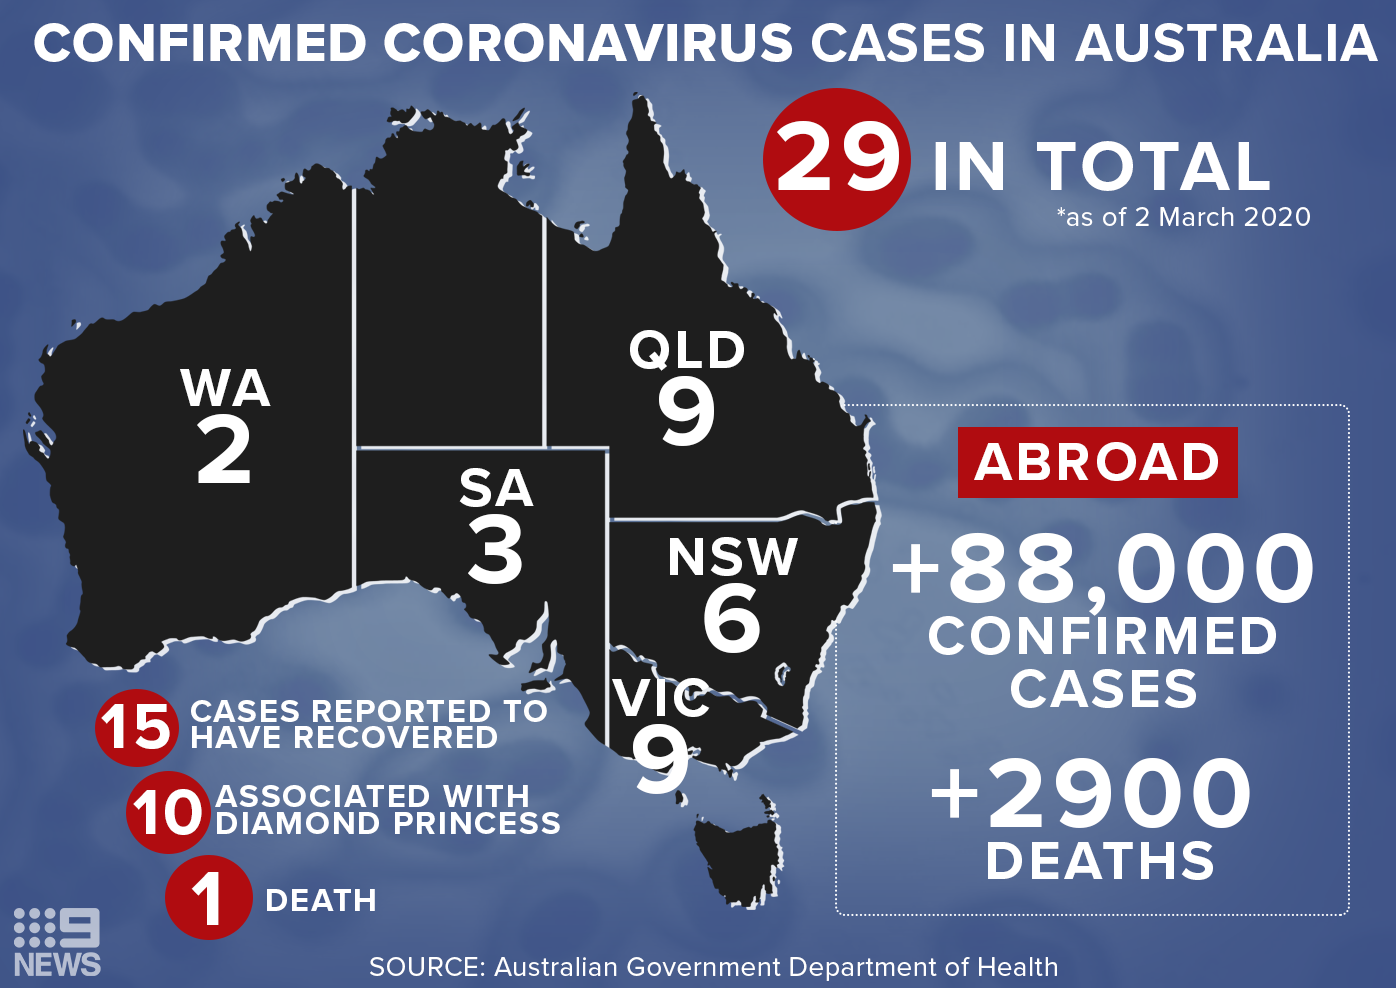 There are 29 confirmed coronavirus cases in Australia as of 2nd March 2020. Graphic